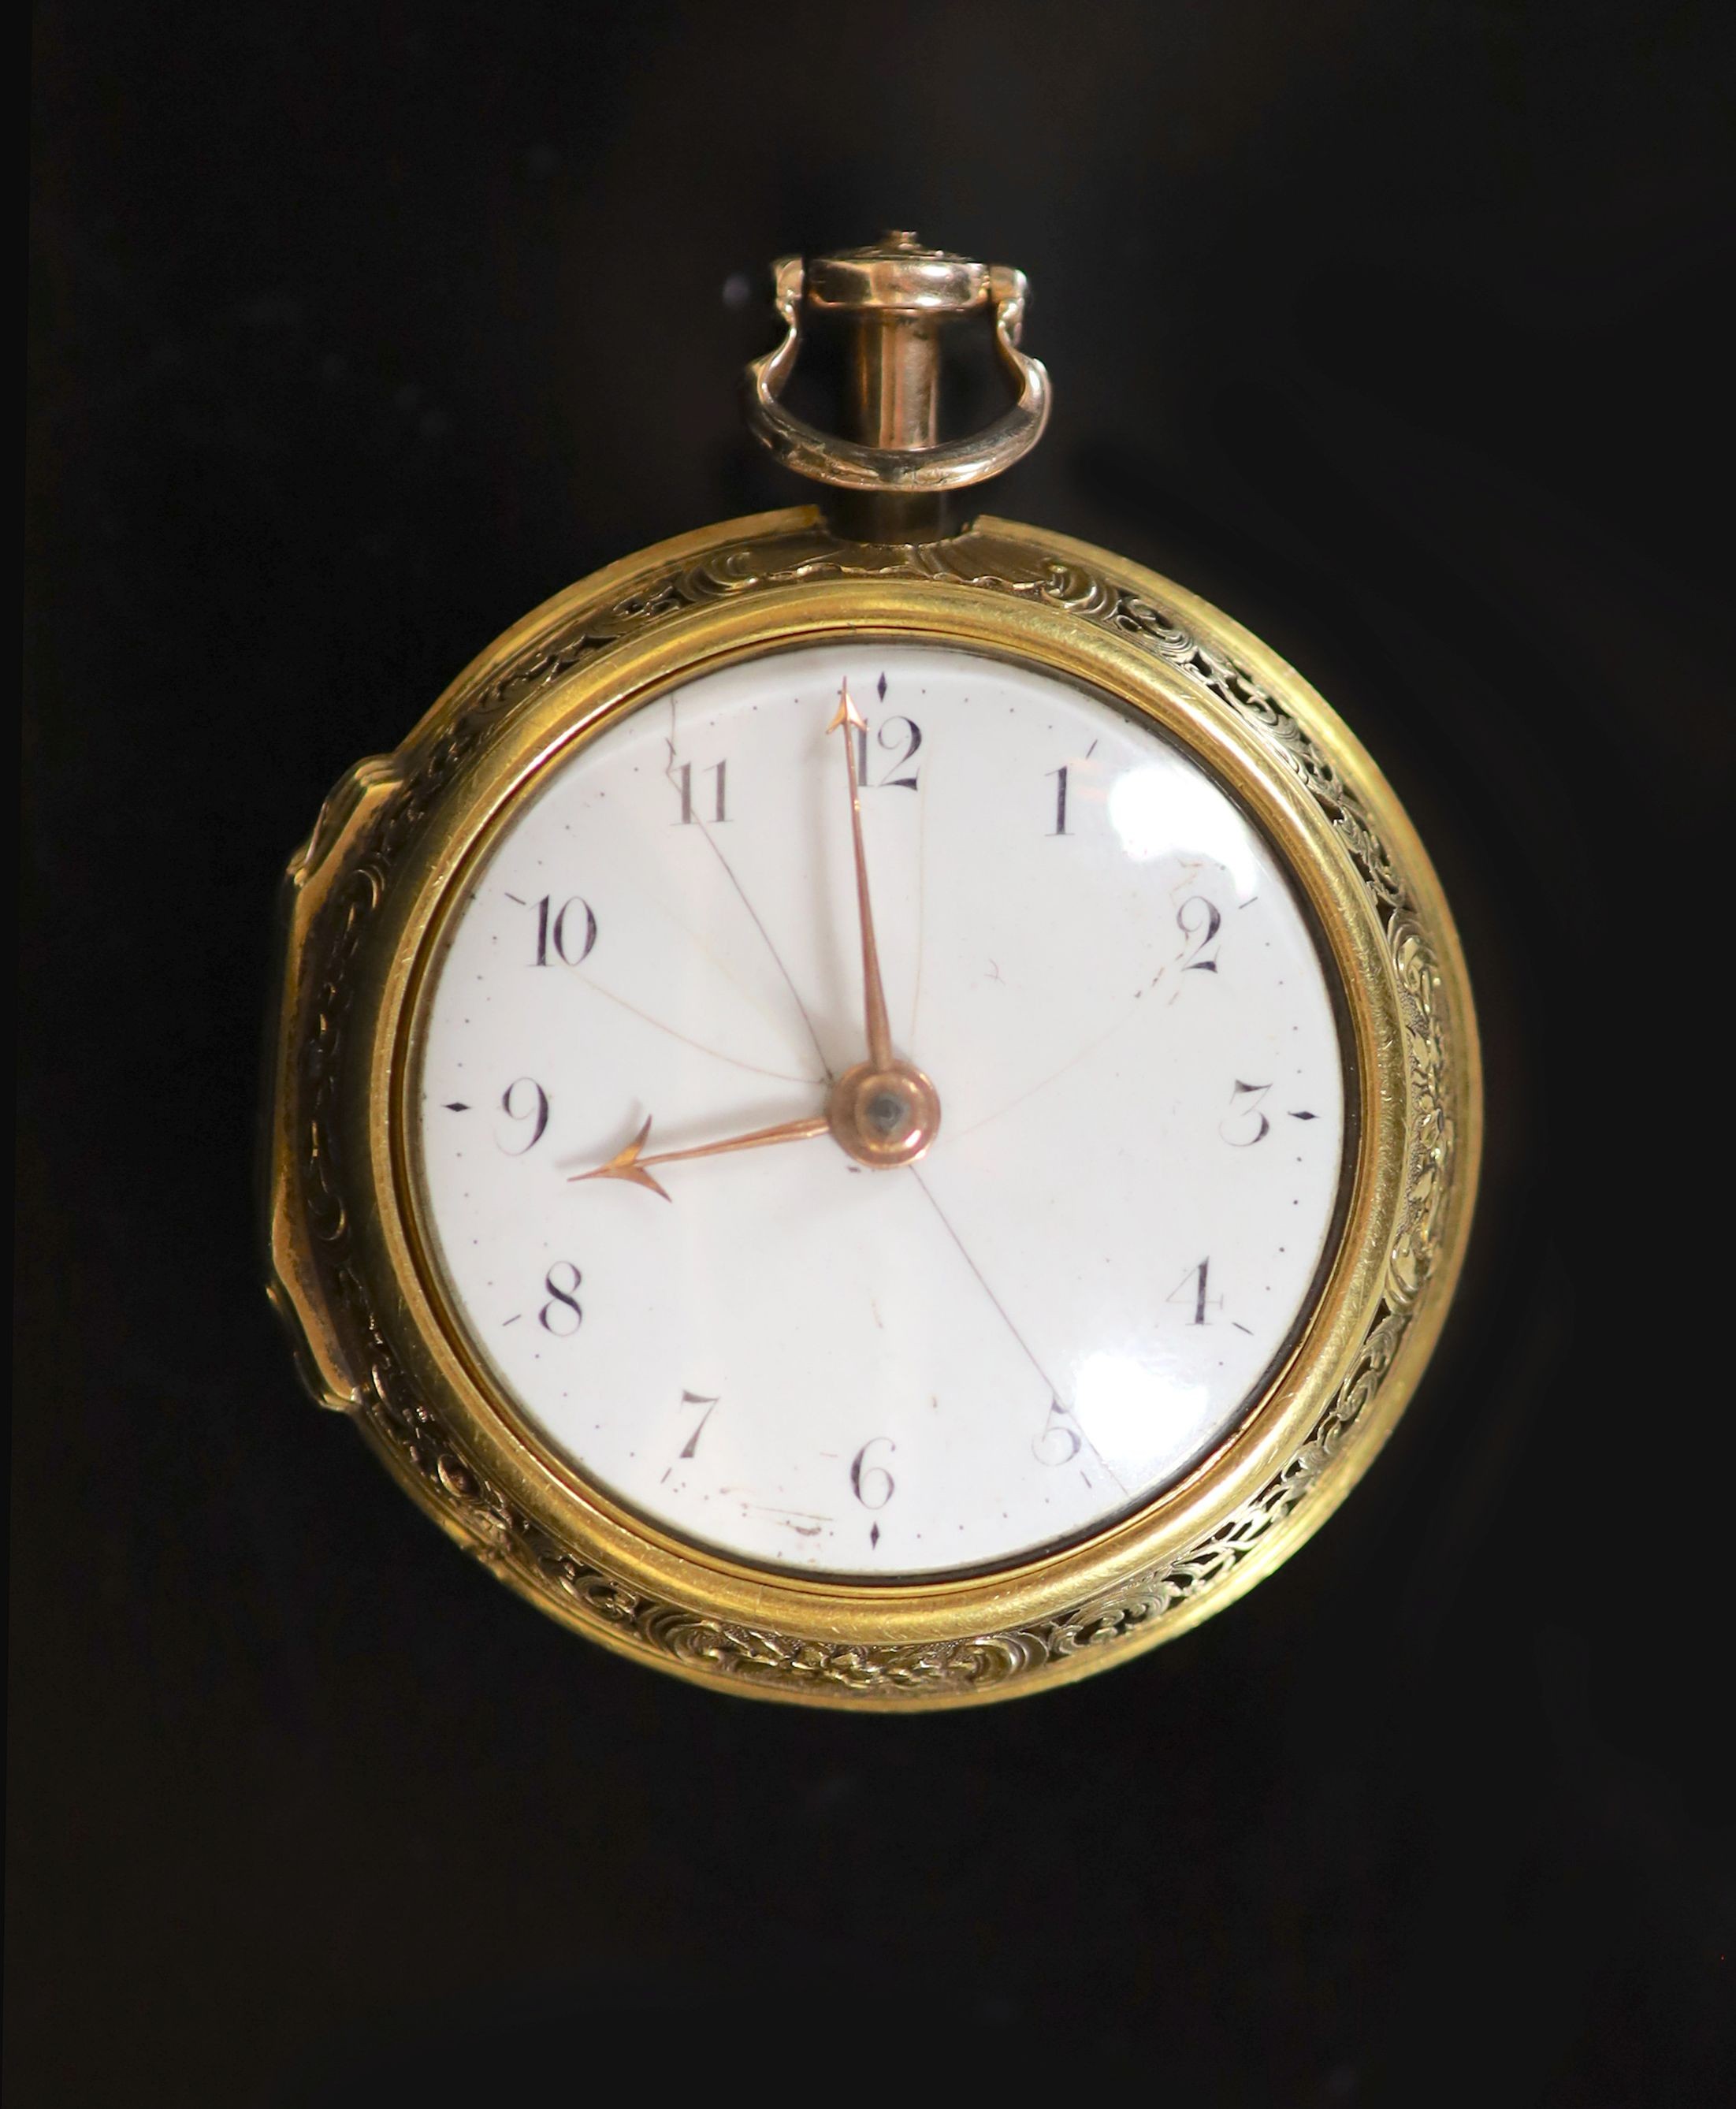 A George III gold pair cased keywind quarter repeating pocket watch by Thomas Gardner of London H 5.75cm.